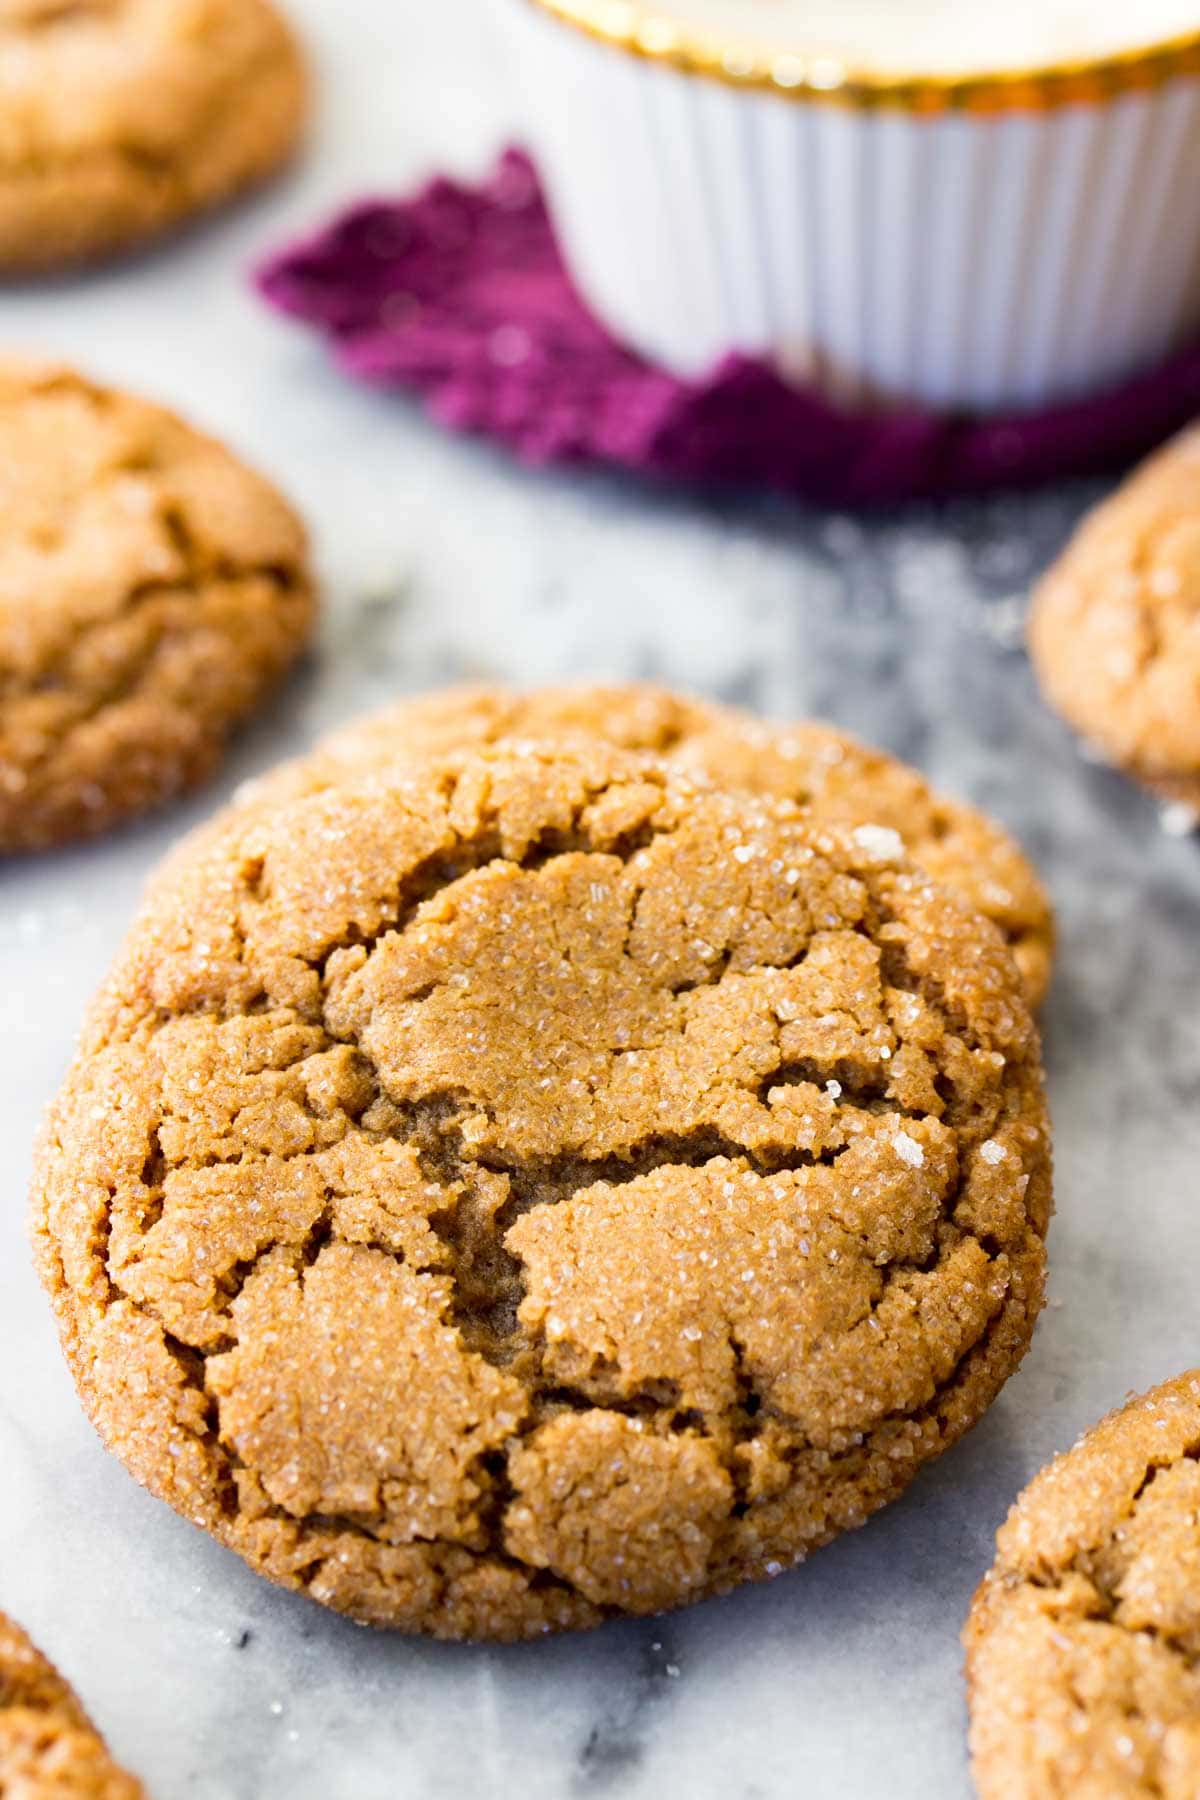 Soft and chewy spice cookies with crackled, sugary exteriors.